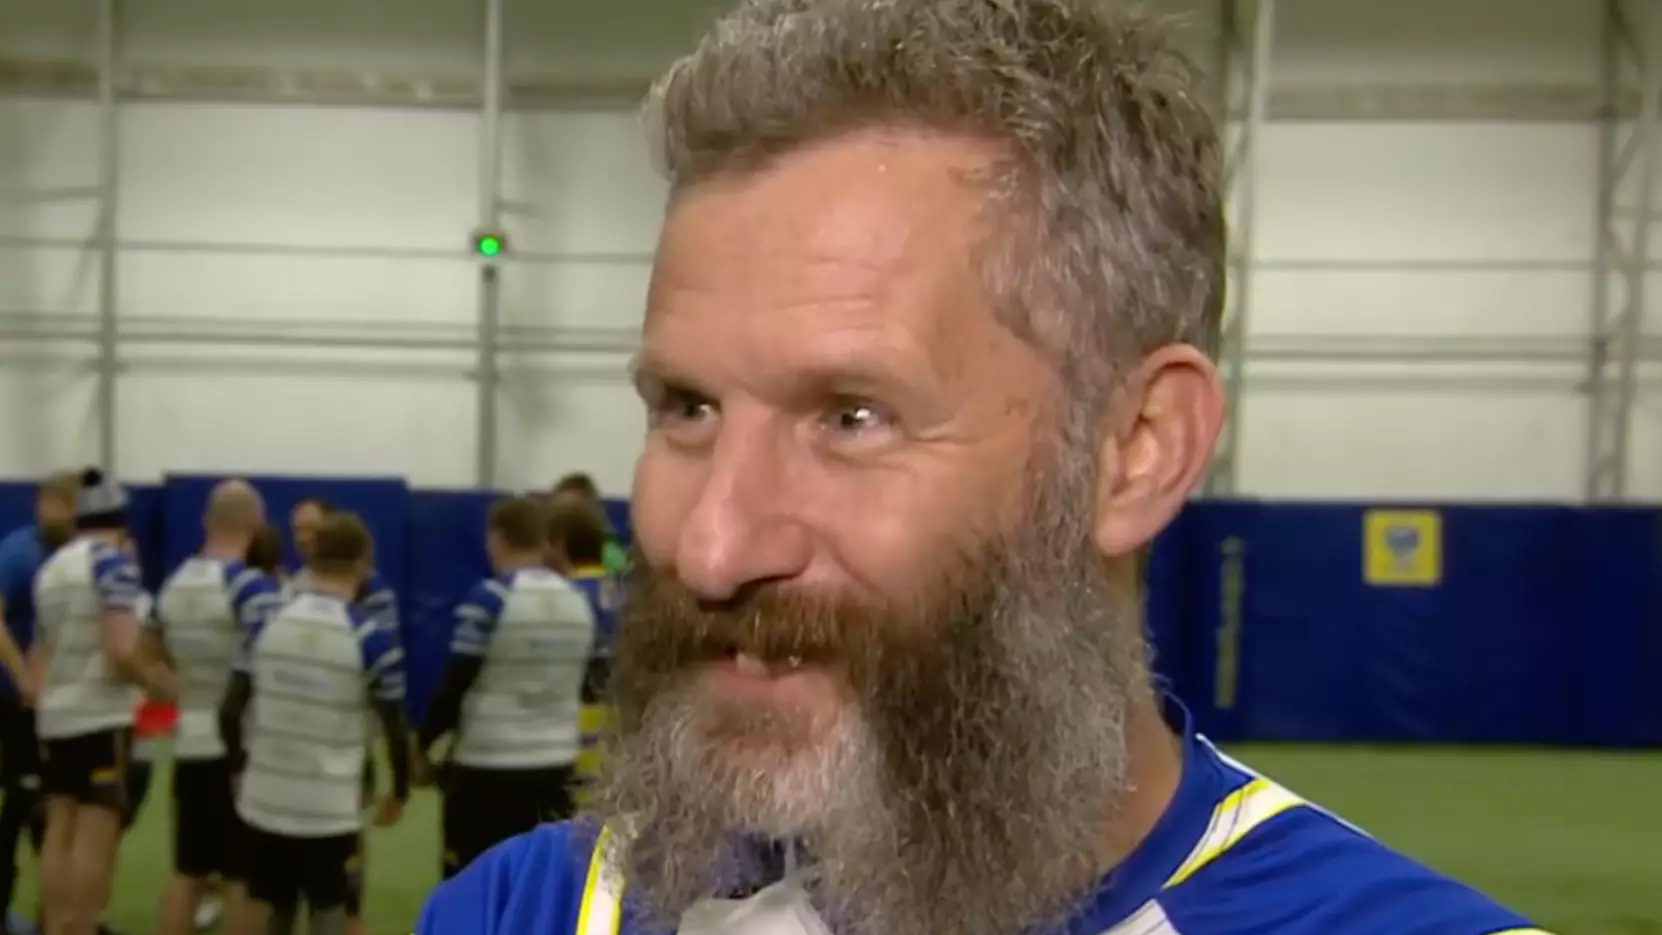 Aussie Legend Adam Hills Turned Down Meeting With Prince Charles Because He Had Footy Training